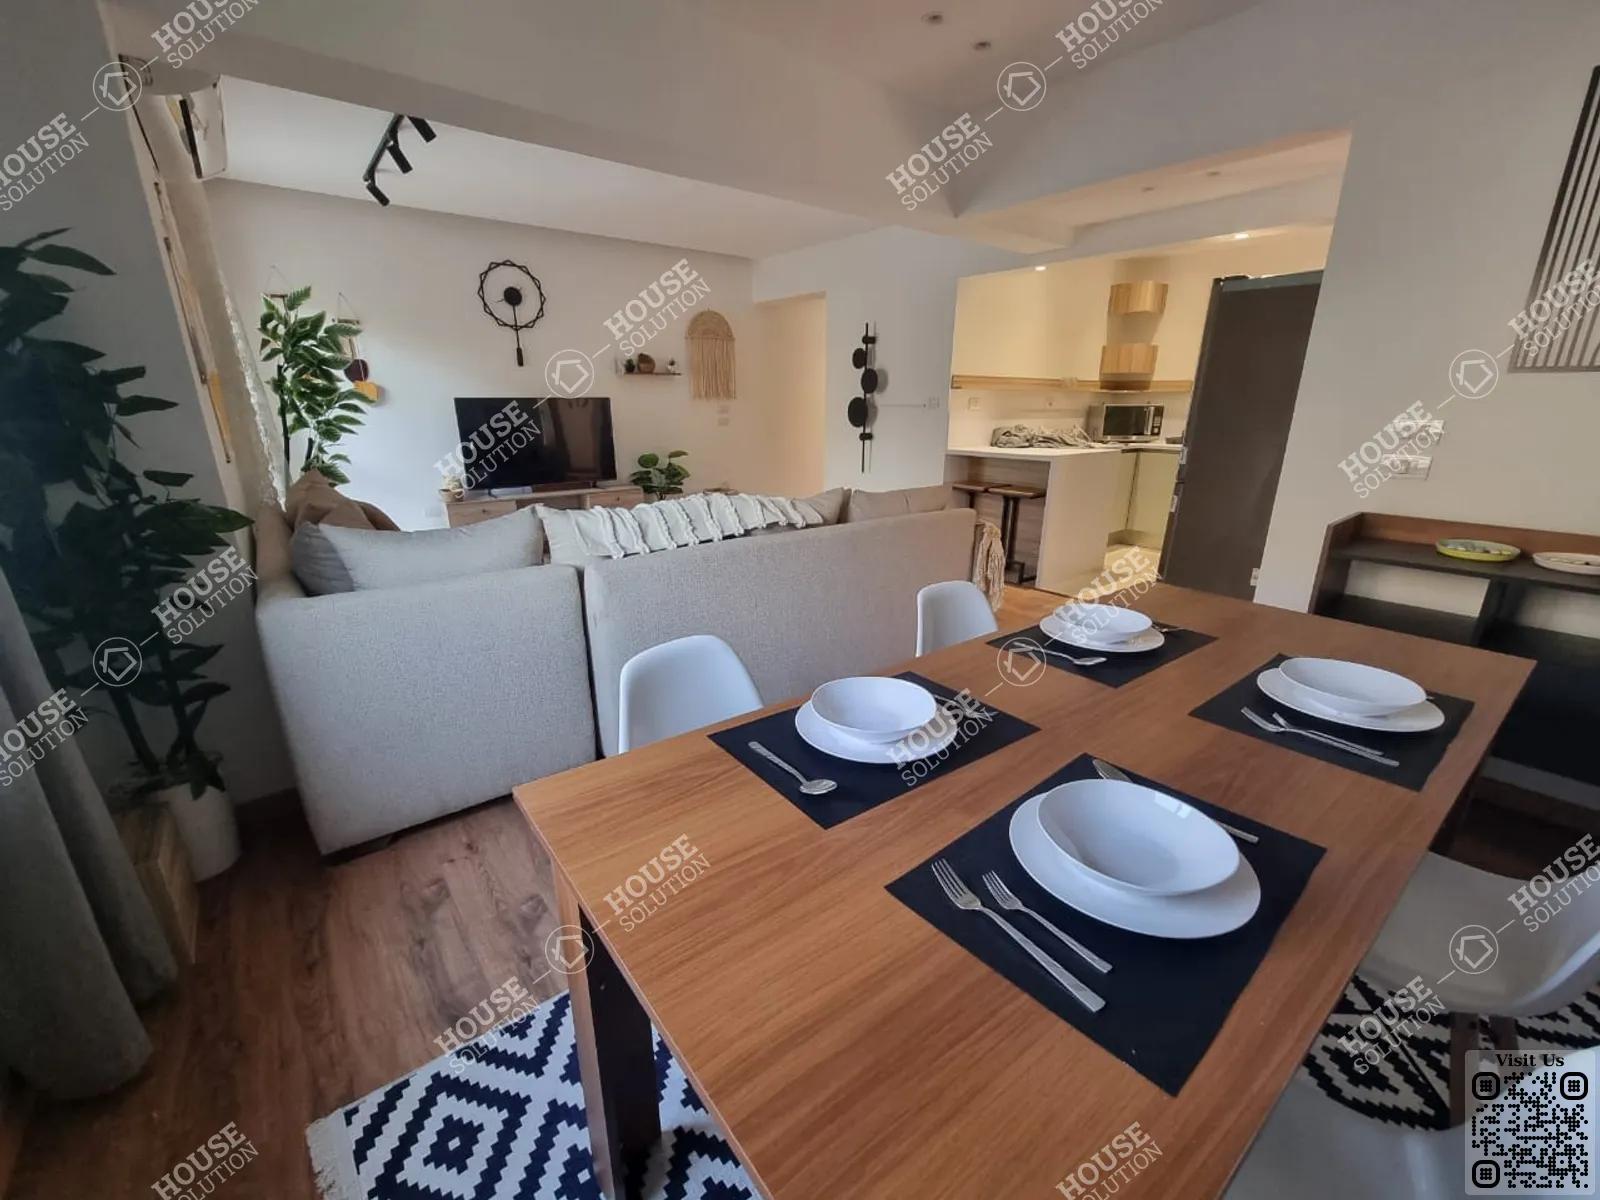 DINING AREA @ Apartments For Rent In Maadi Maadi Degla Area: 130 m² consists of 2 Bedrooms 2 Bathrooms Modern furnished 5 stars #5760-1